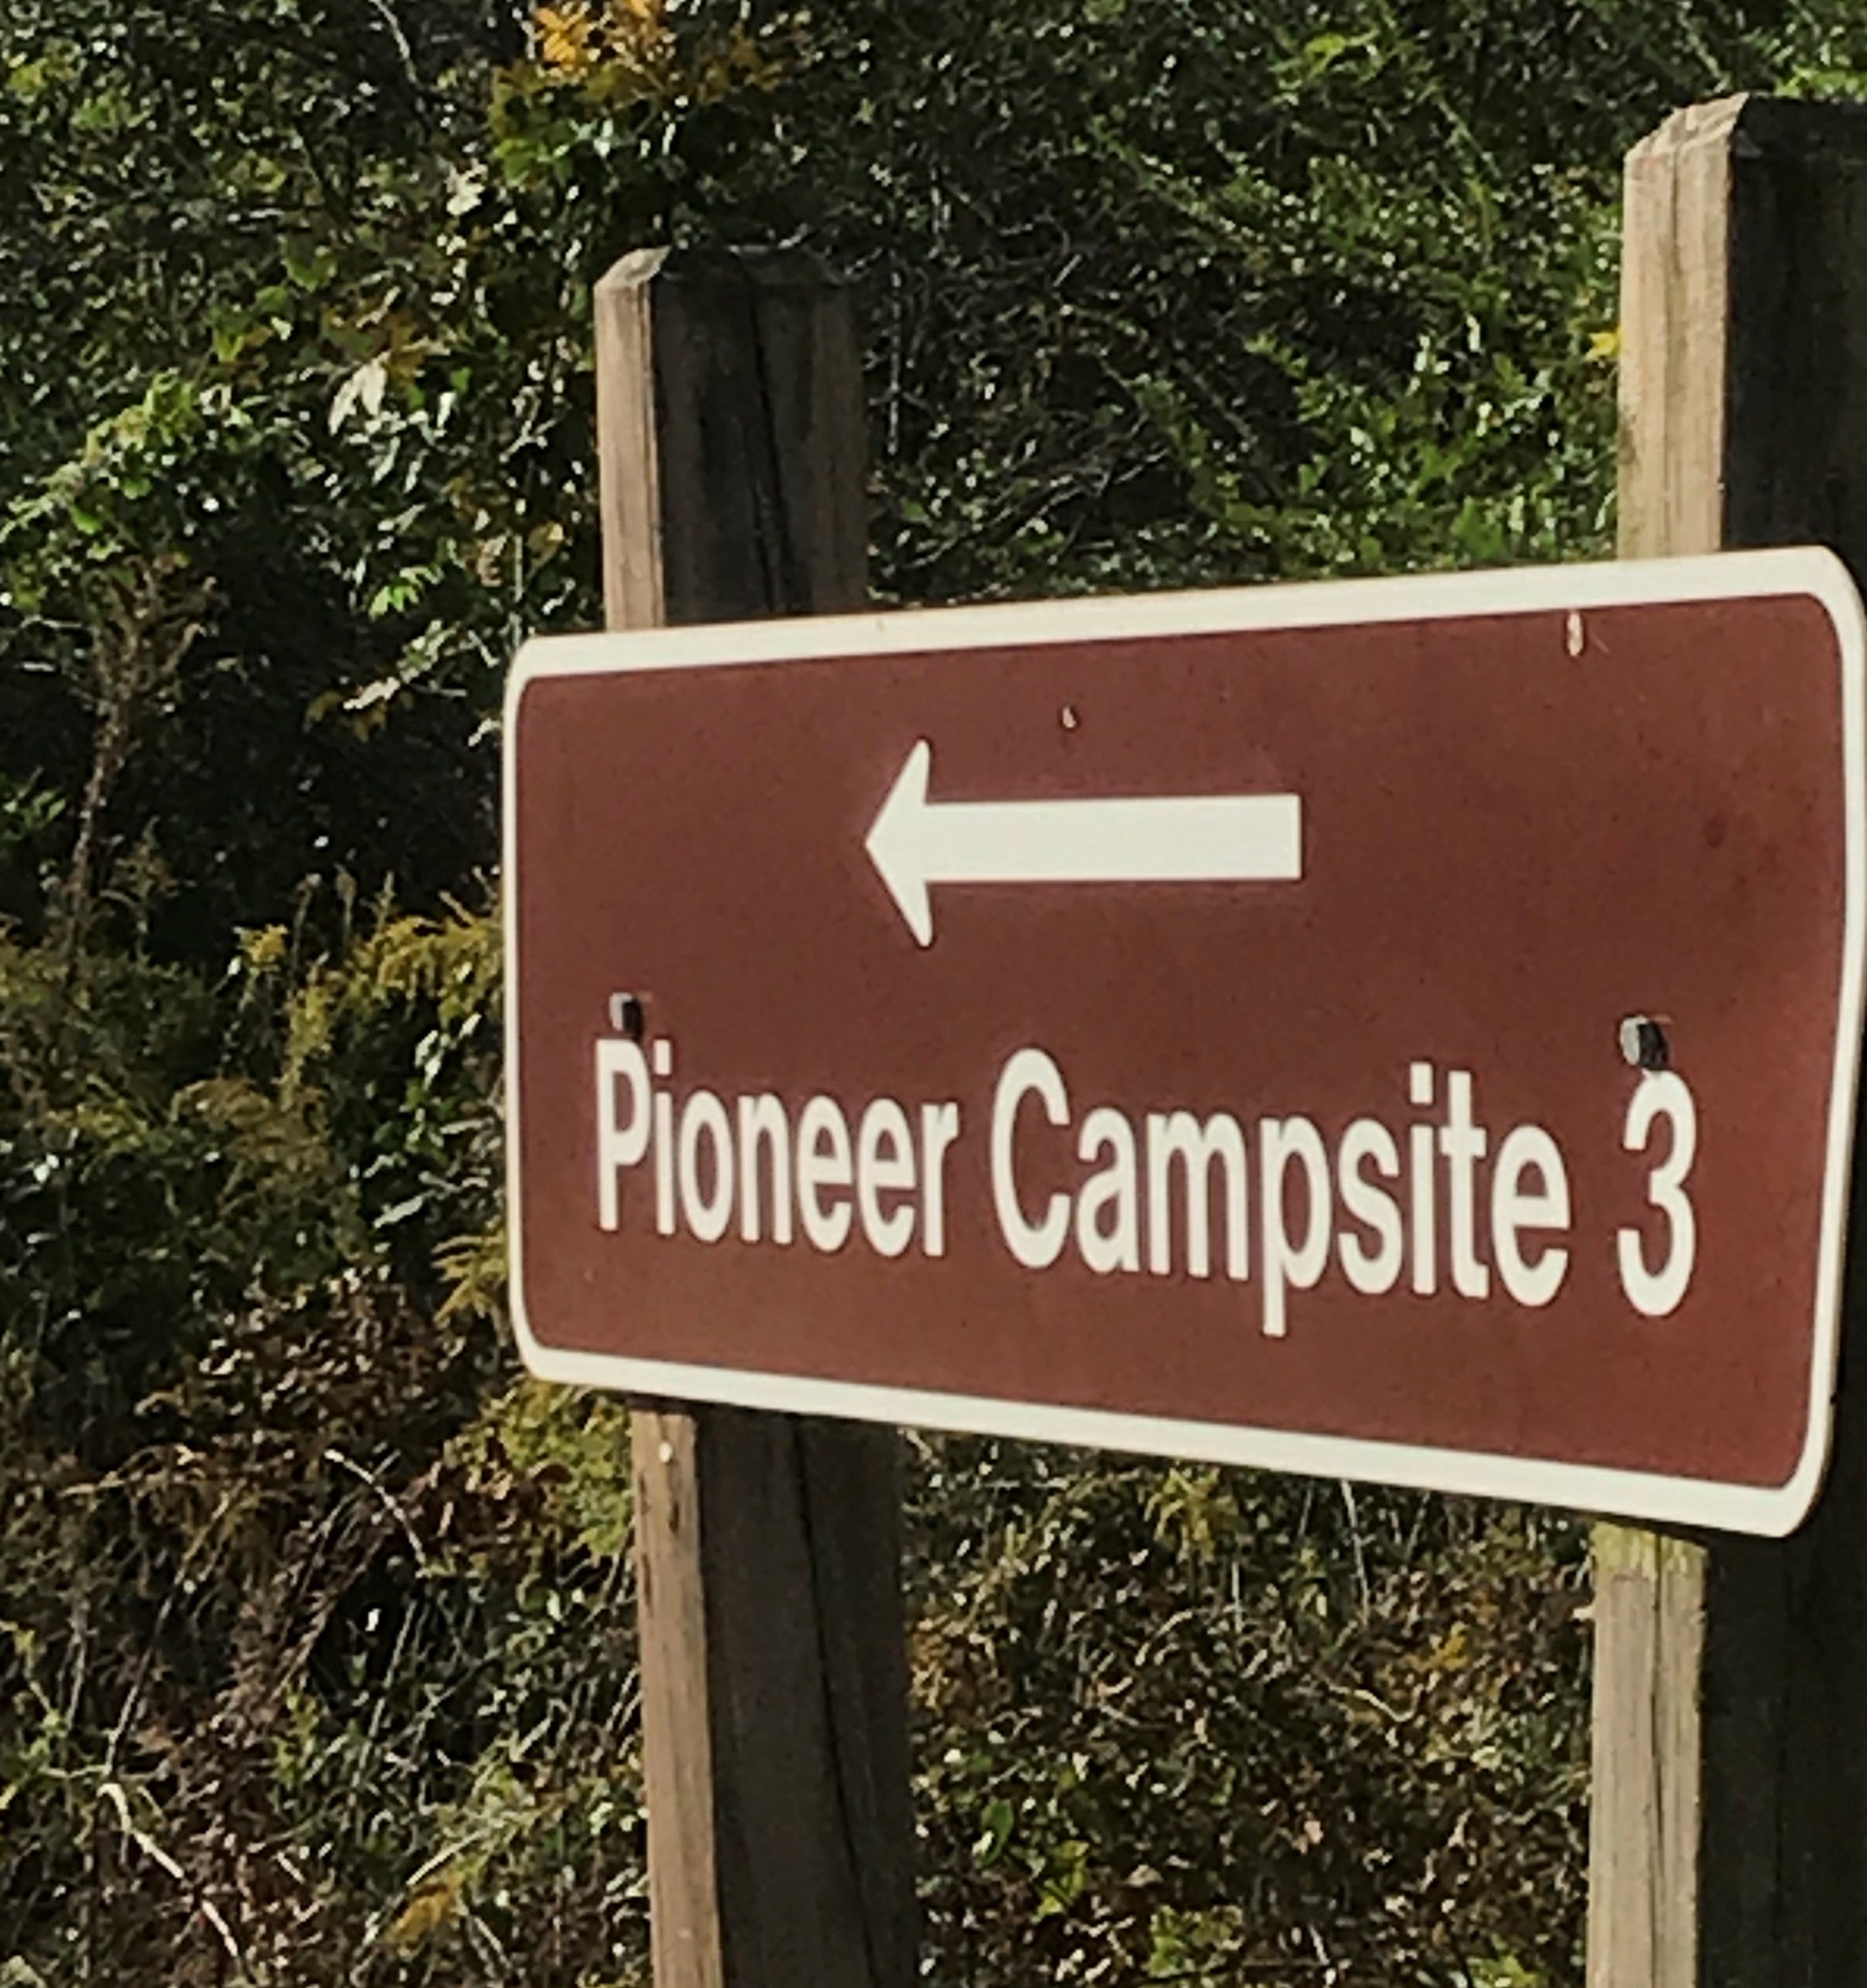 Pioneer Campsite 3 is directly to your left as you enter the main Park entrance.